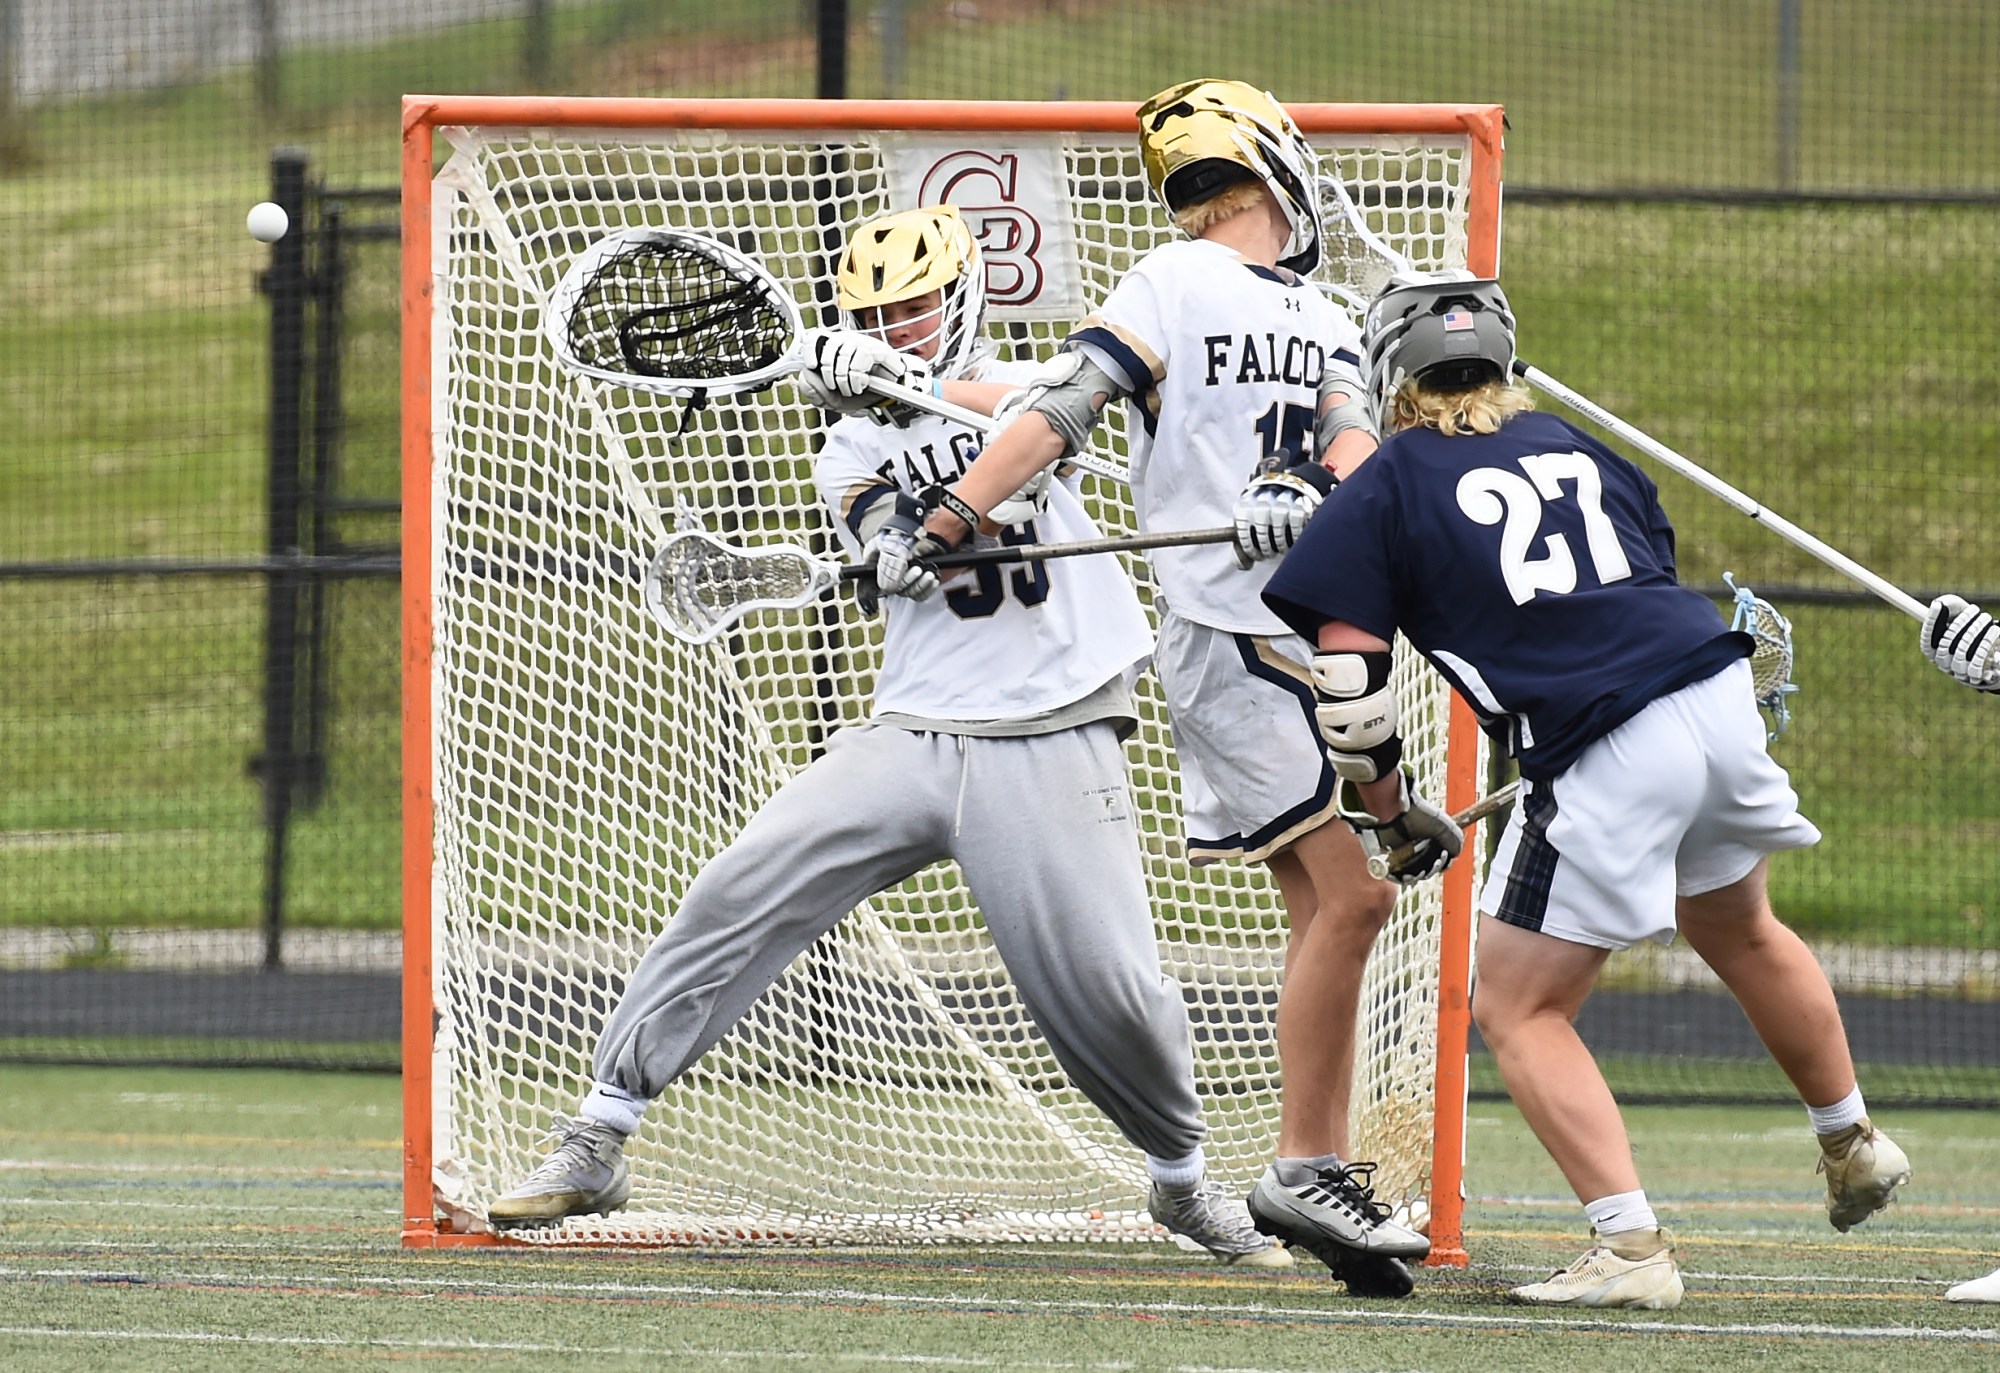 Severna Park goal keeper Calvin Winship makes a save in the first quarter. The Severna Park Falcons defeated the Marriotts Ridge Mustangs, 10-7, in a MPSSAA 3A boys lacrosse semifinal at Glen Burnie High School. (Paul W. Gillespie/Staff photo)